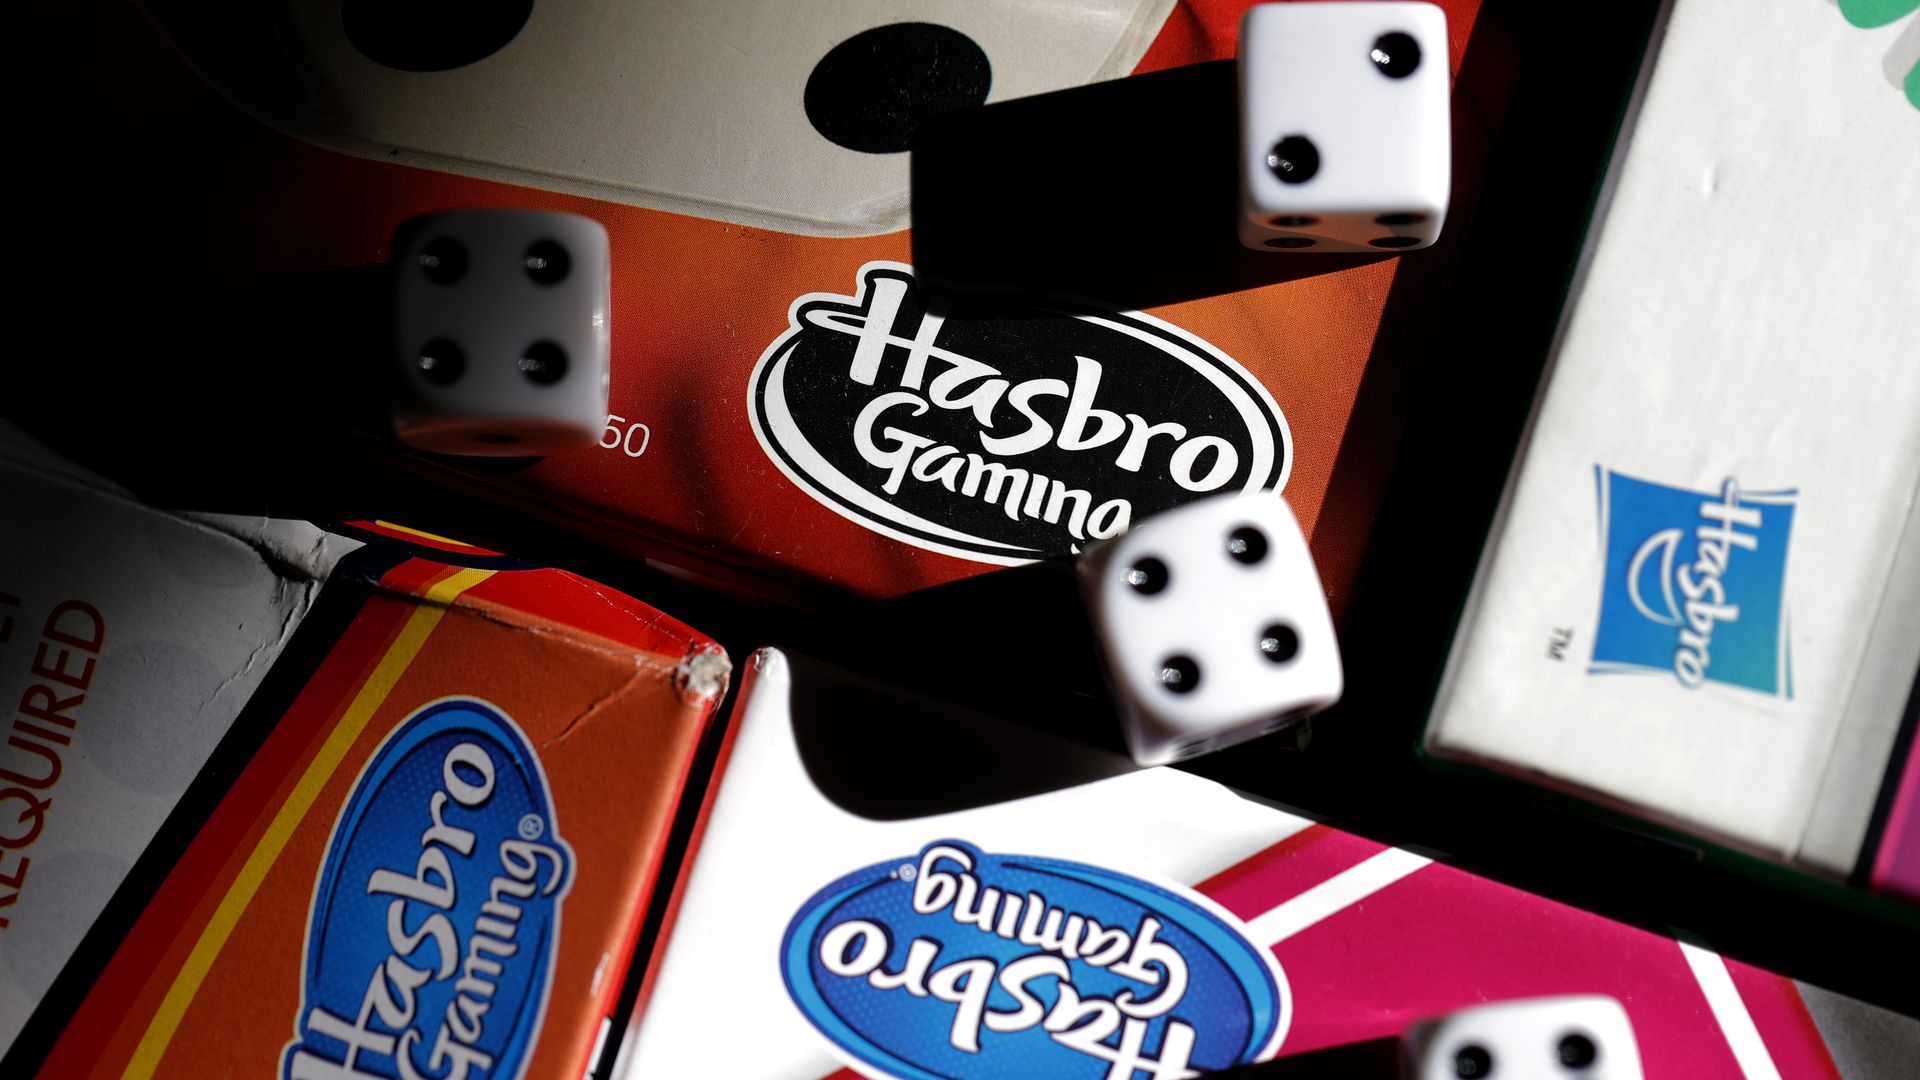 A Hasbro board arranged with dice. Photo Illustration by Justin Sullivan/Getty Images